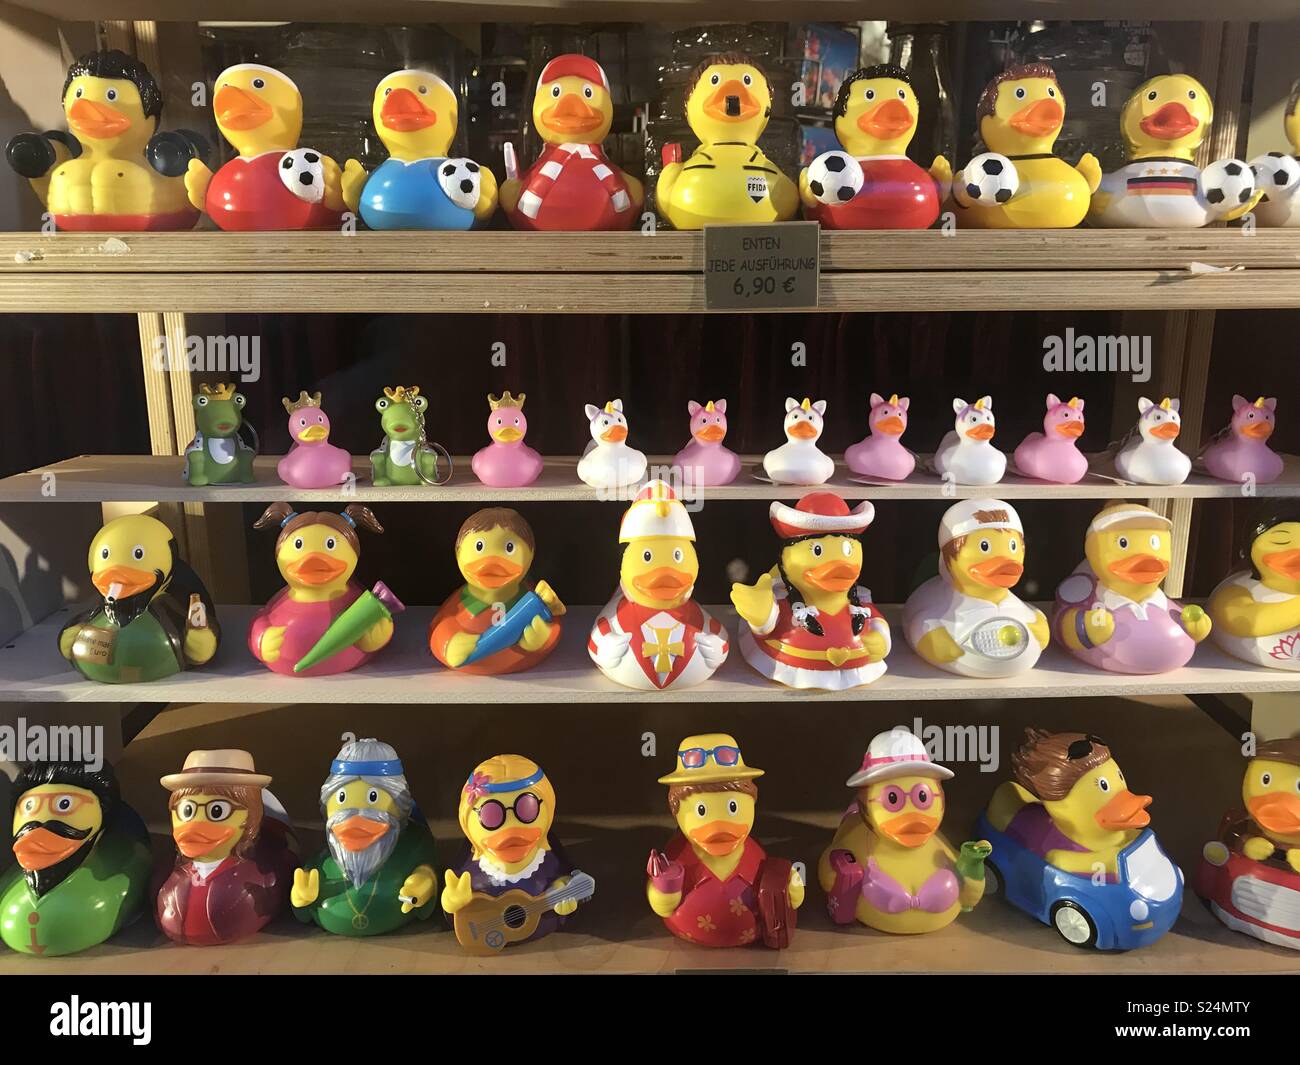 Rubber ducks in costume on shelves.  Footballers and fairytale figures Stock Photo